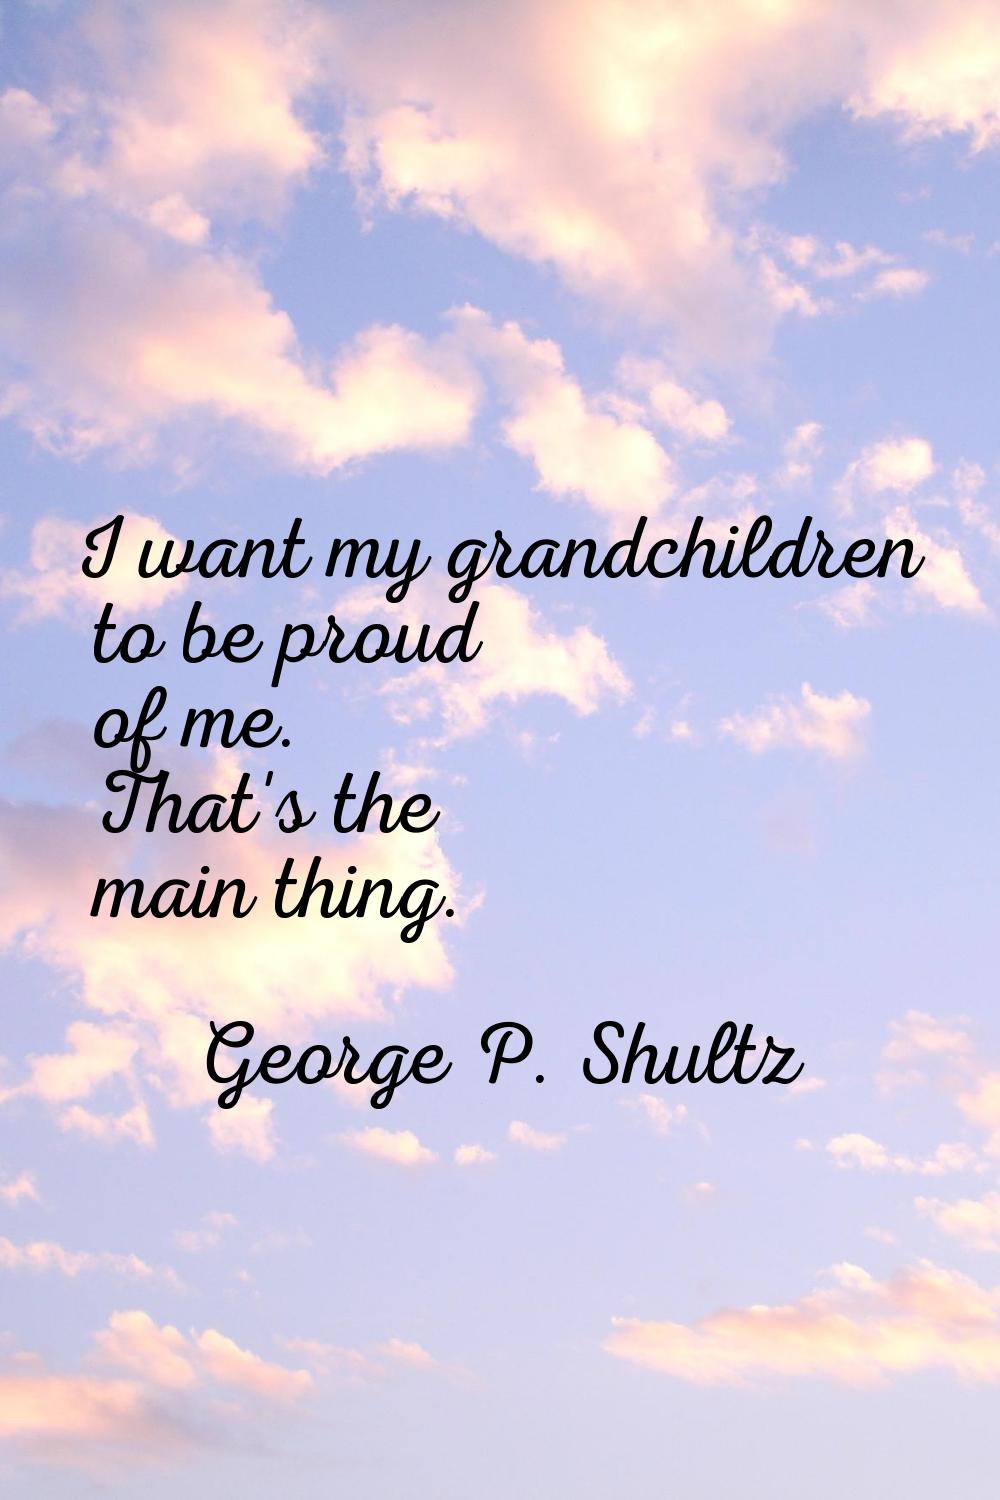 I want my grandchildren to be proud of me. That's the main thing.